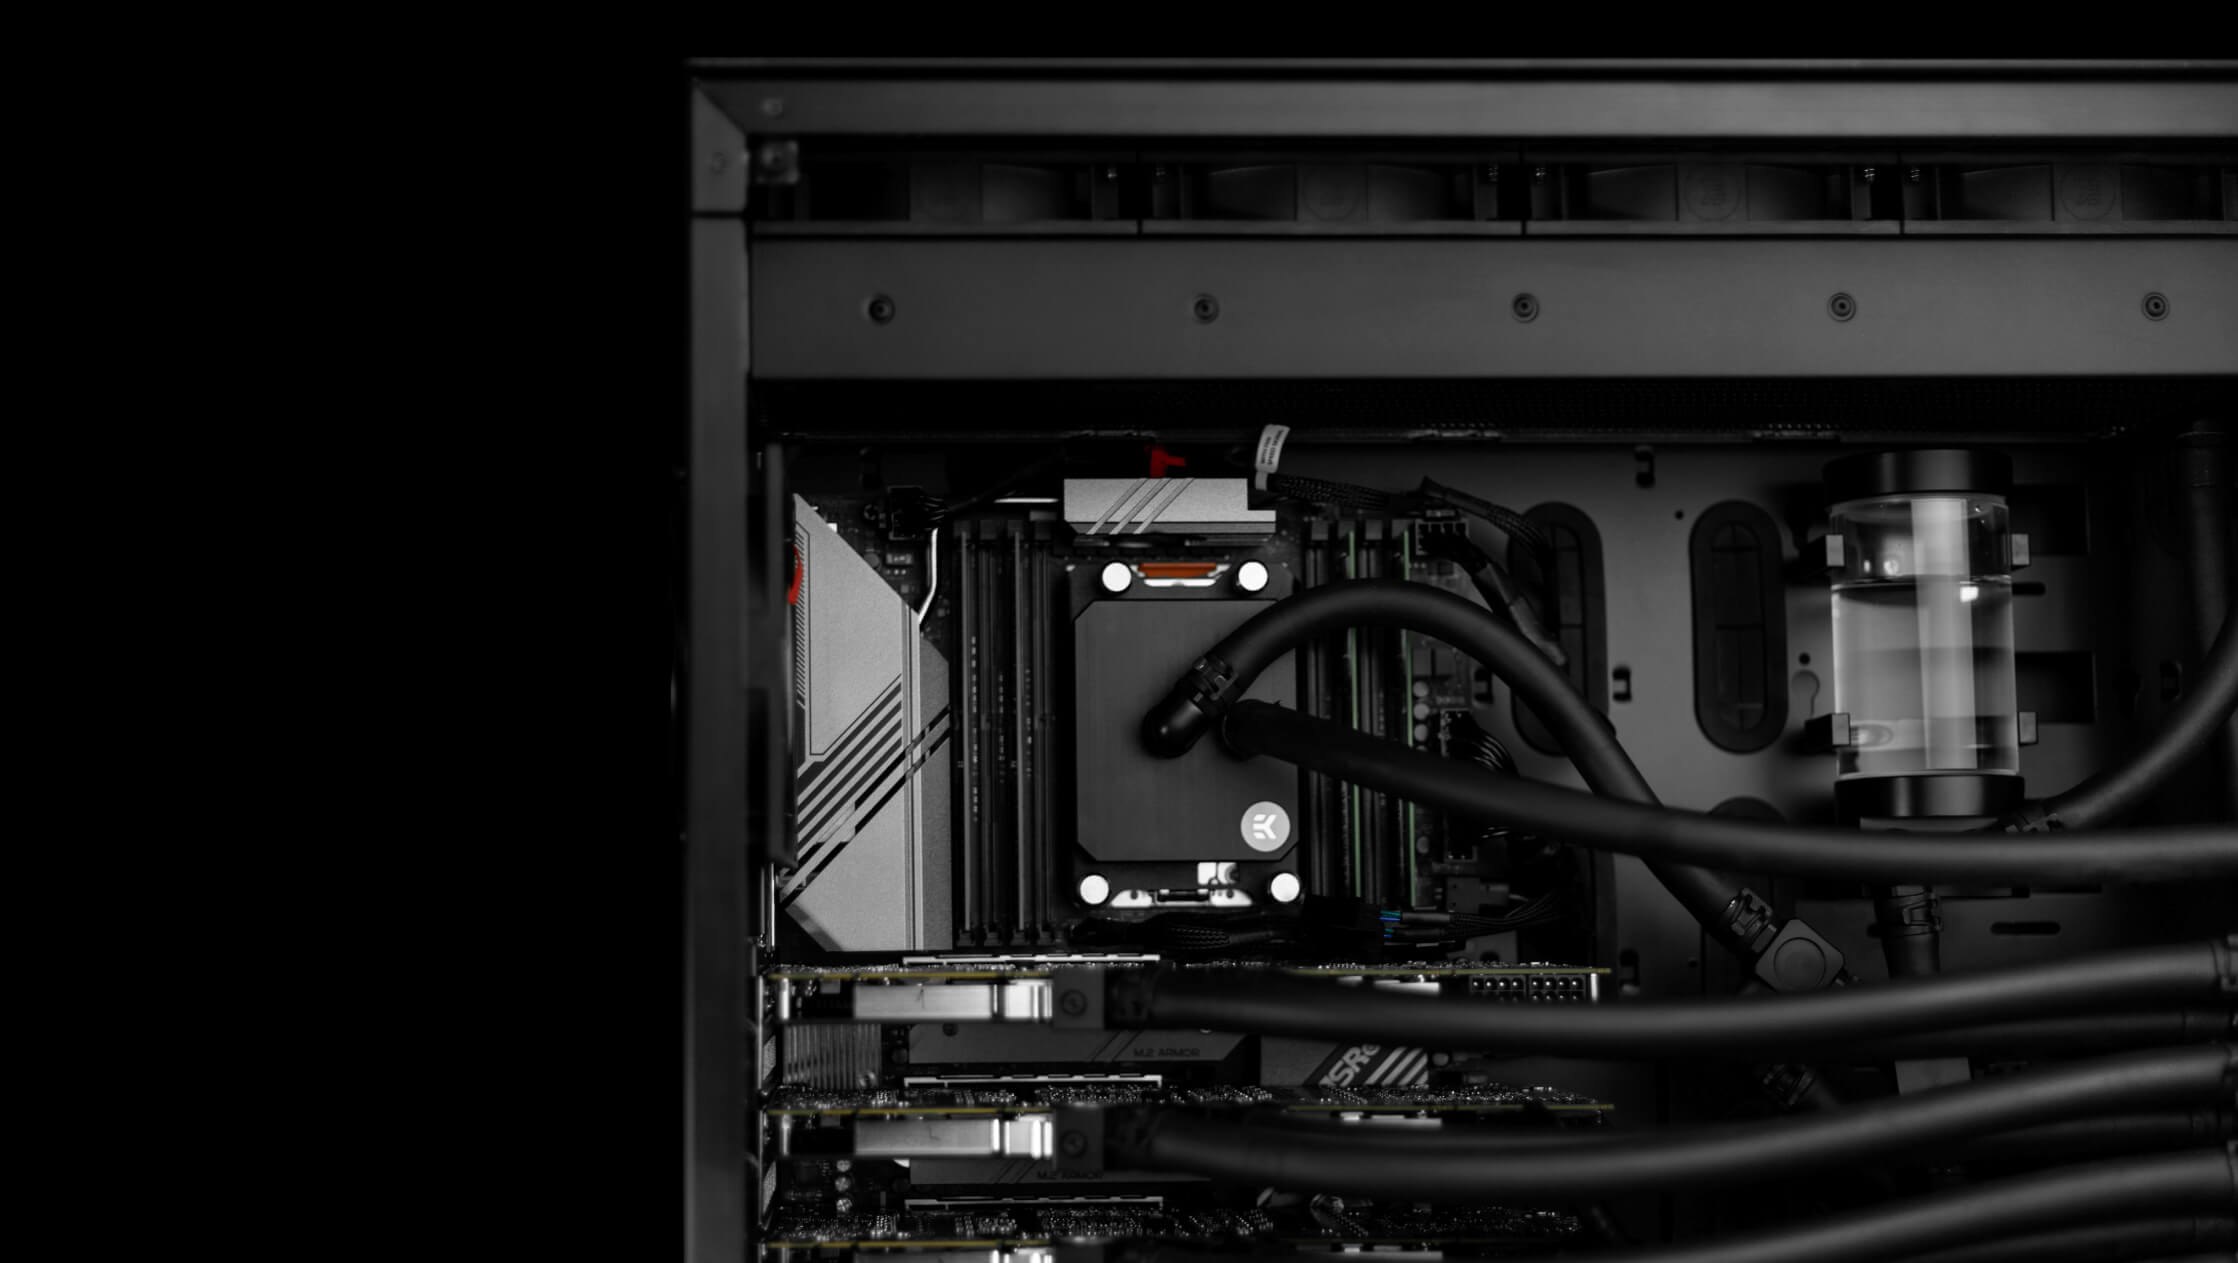 EK-Fluid Works Studio Series S5000 workstation with multiple GPUs – the ideal system for CAD Visualize